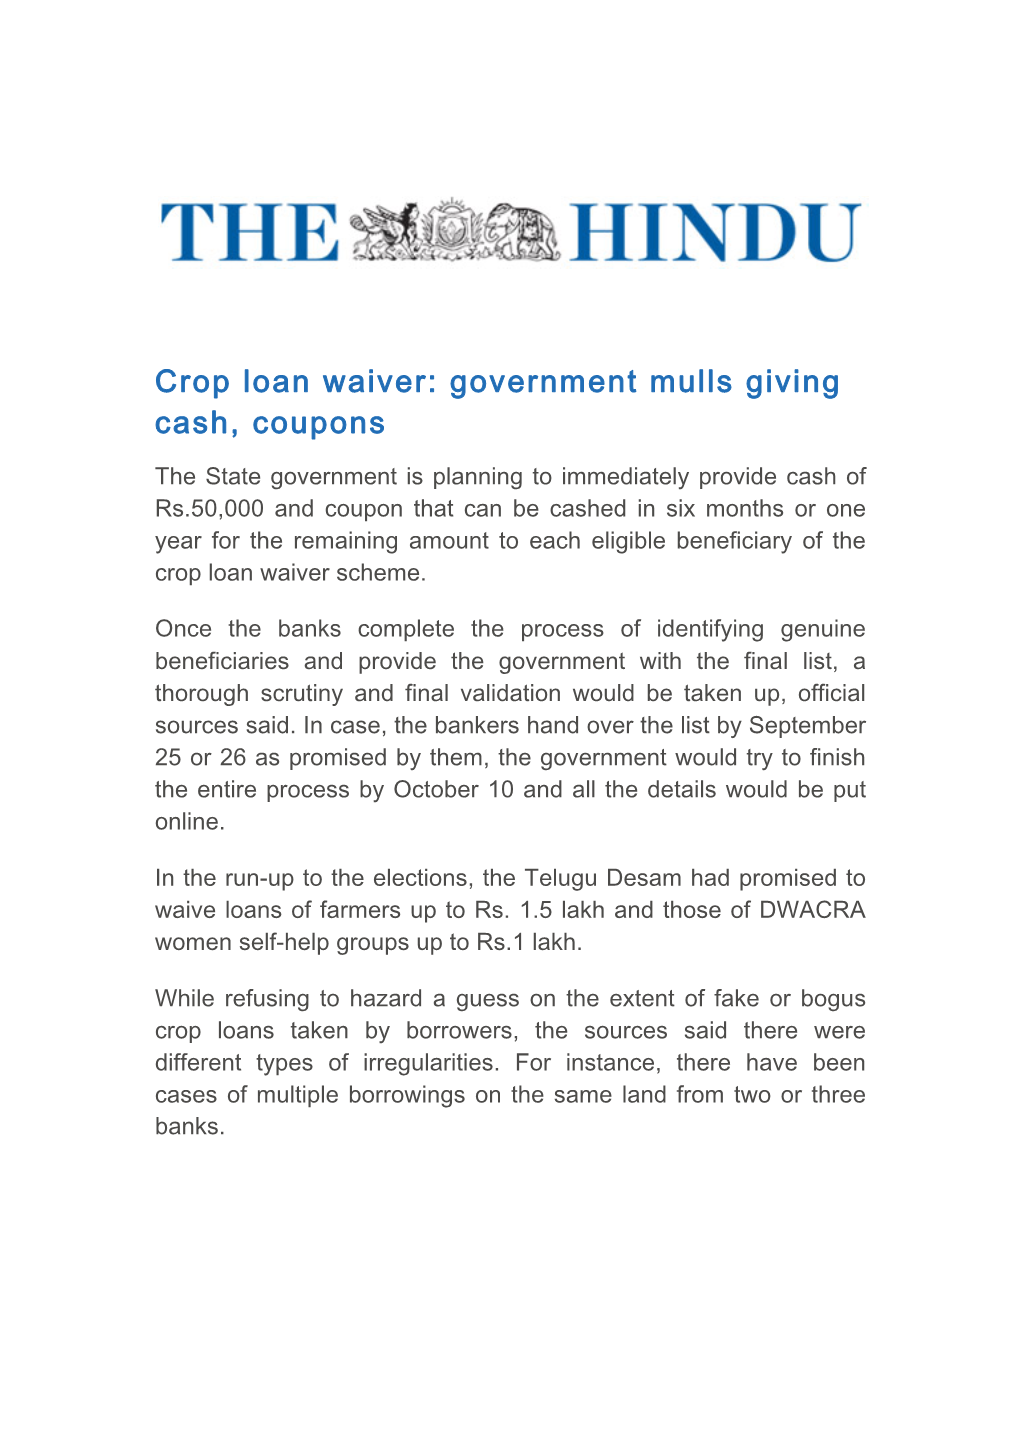 Crop Loan Waiver: Government Mulls Giving Cash, Coupons